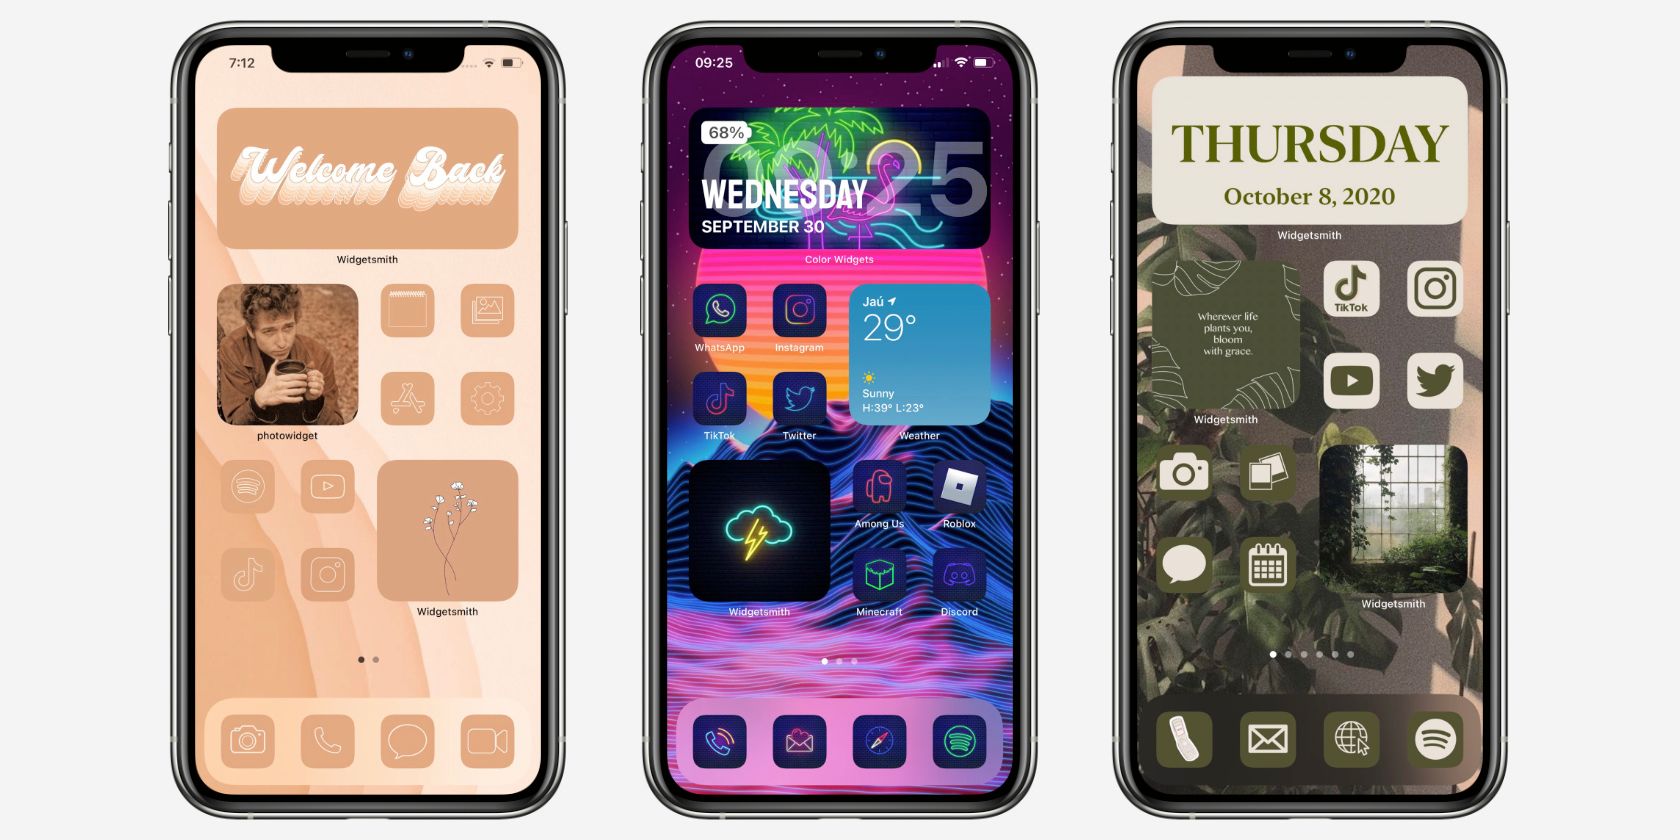 animated home screen iphone